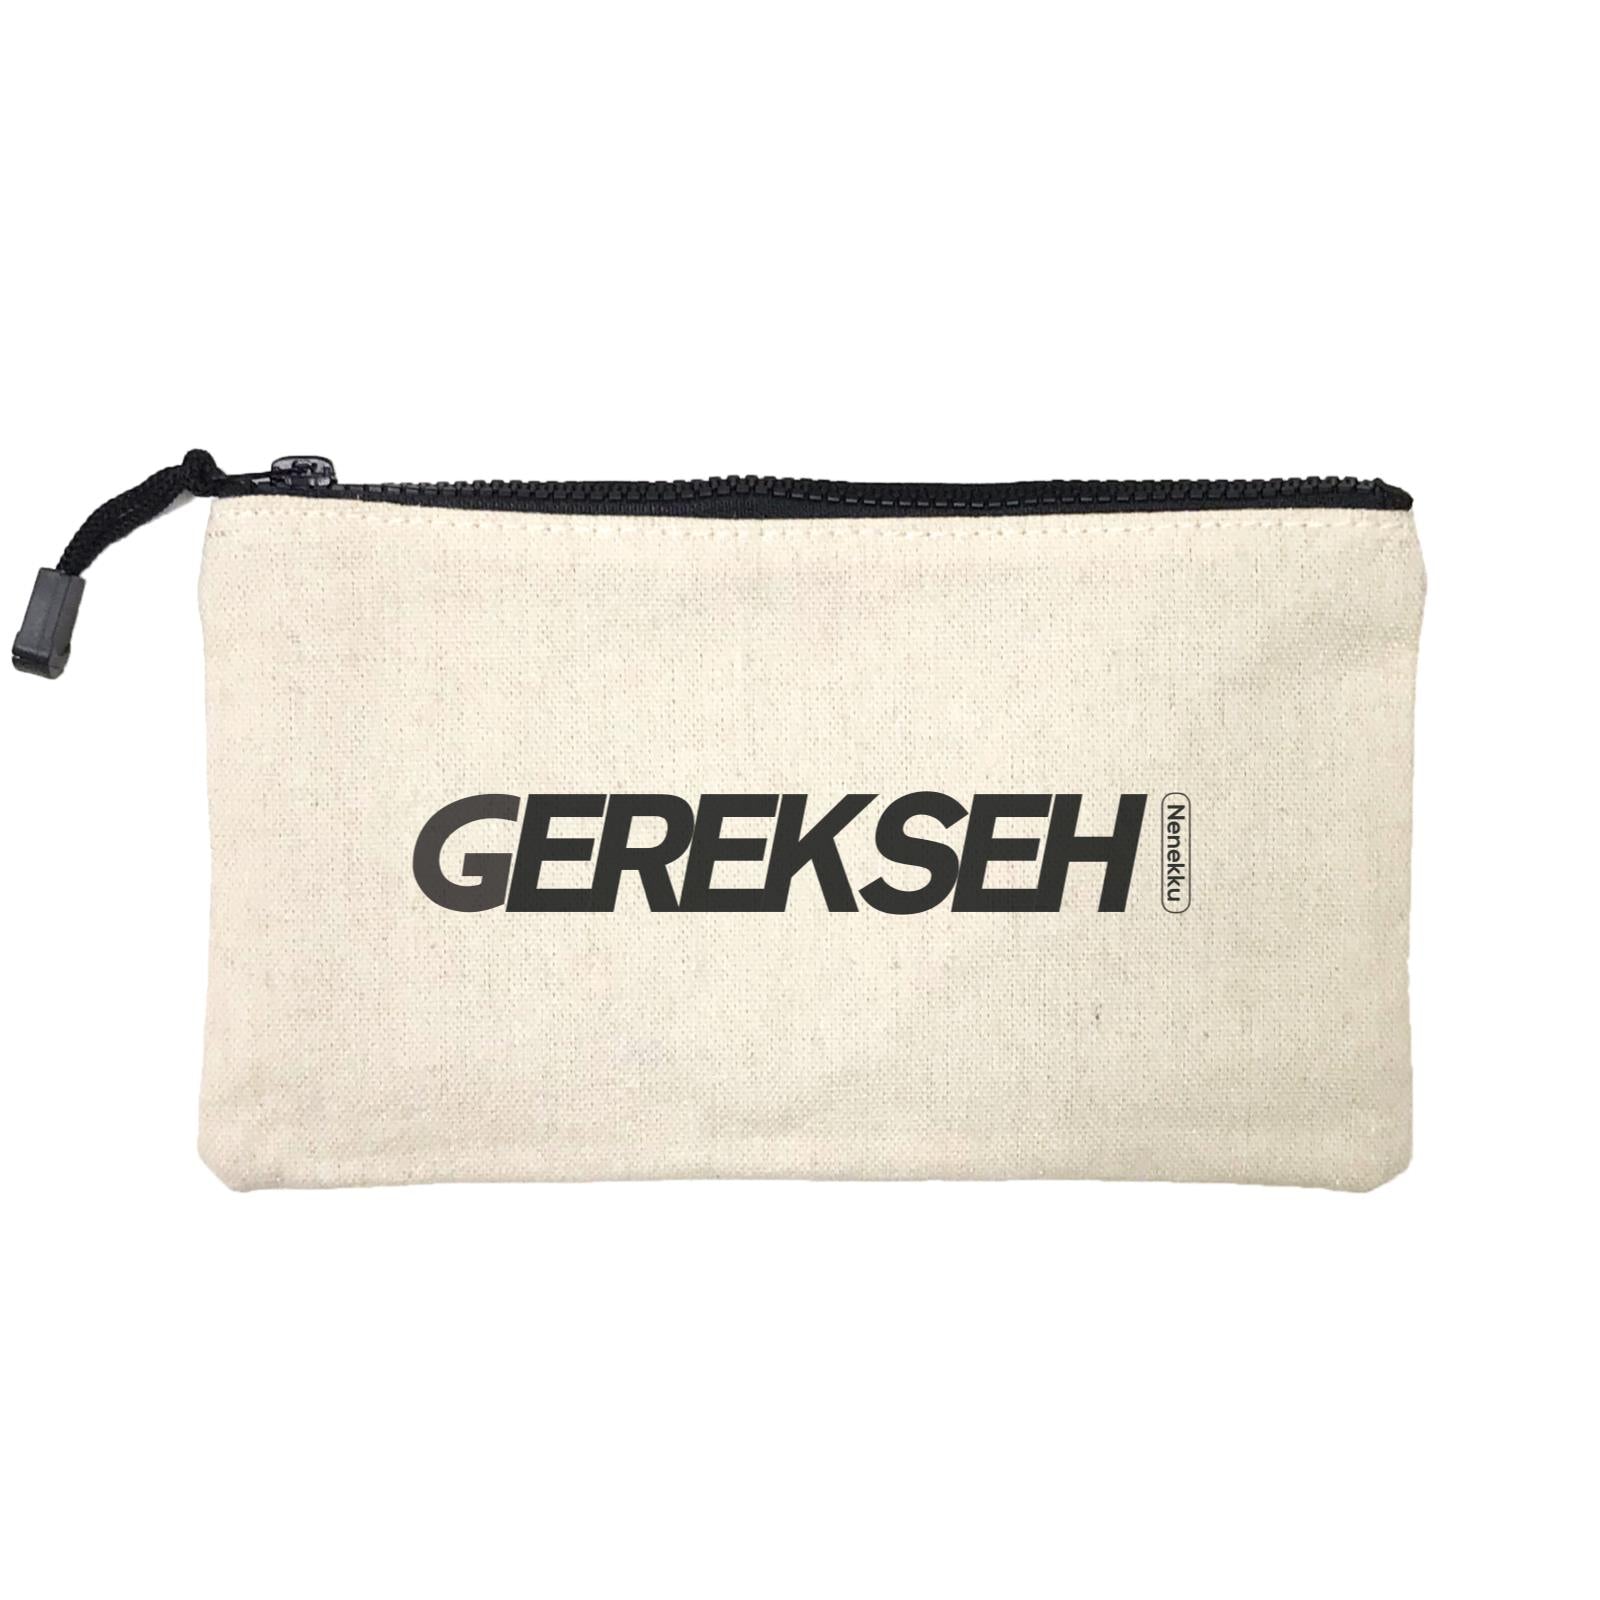 Slang Statement Gerek Seh SP Stationery Pouch